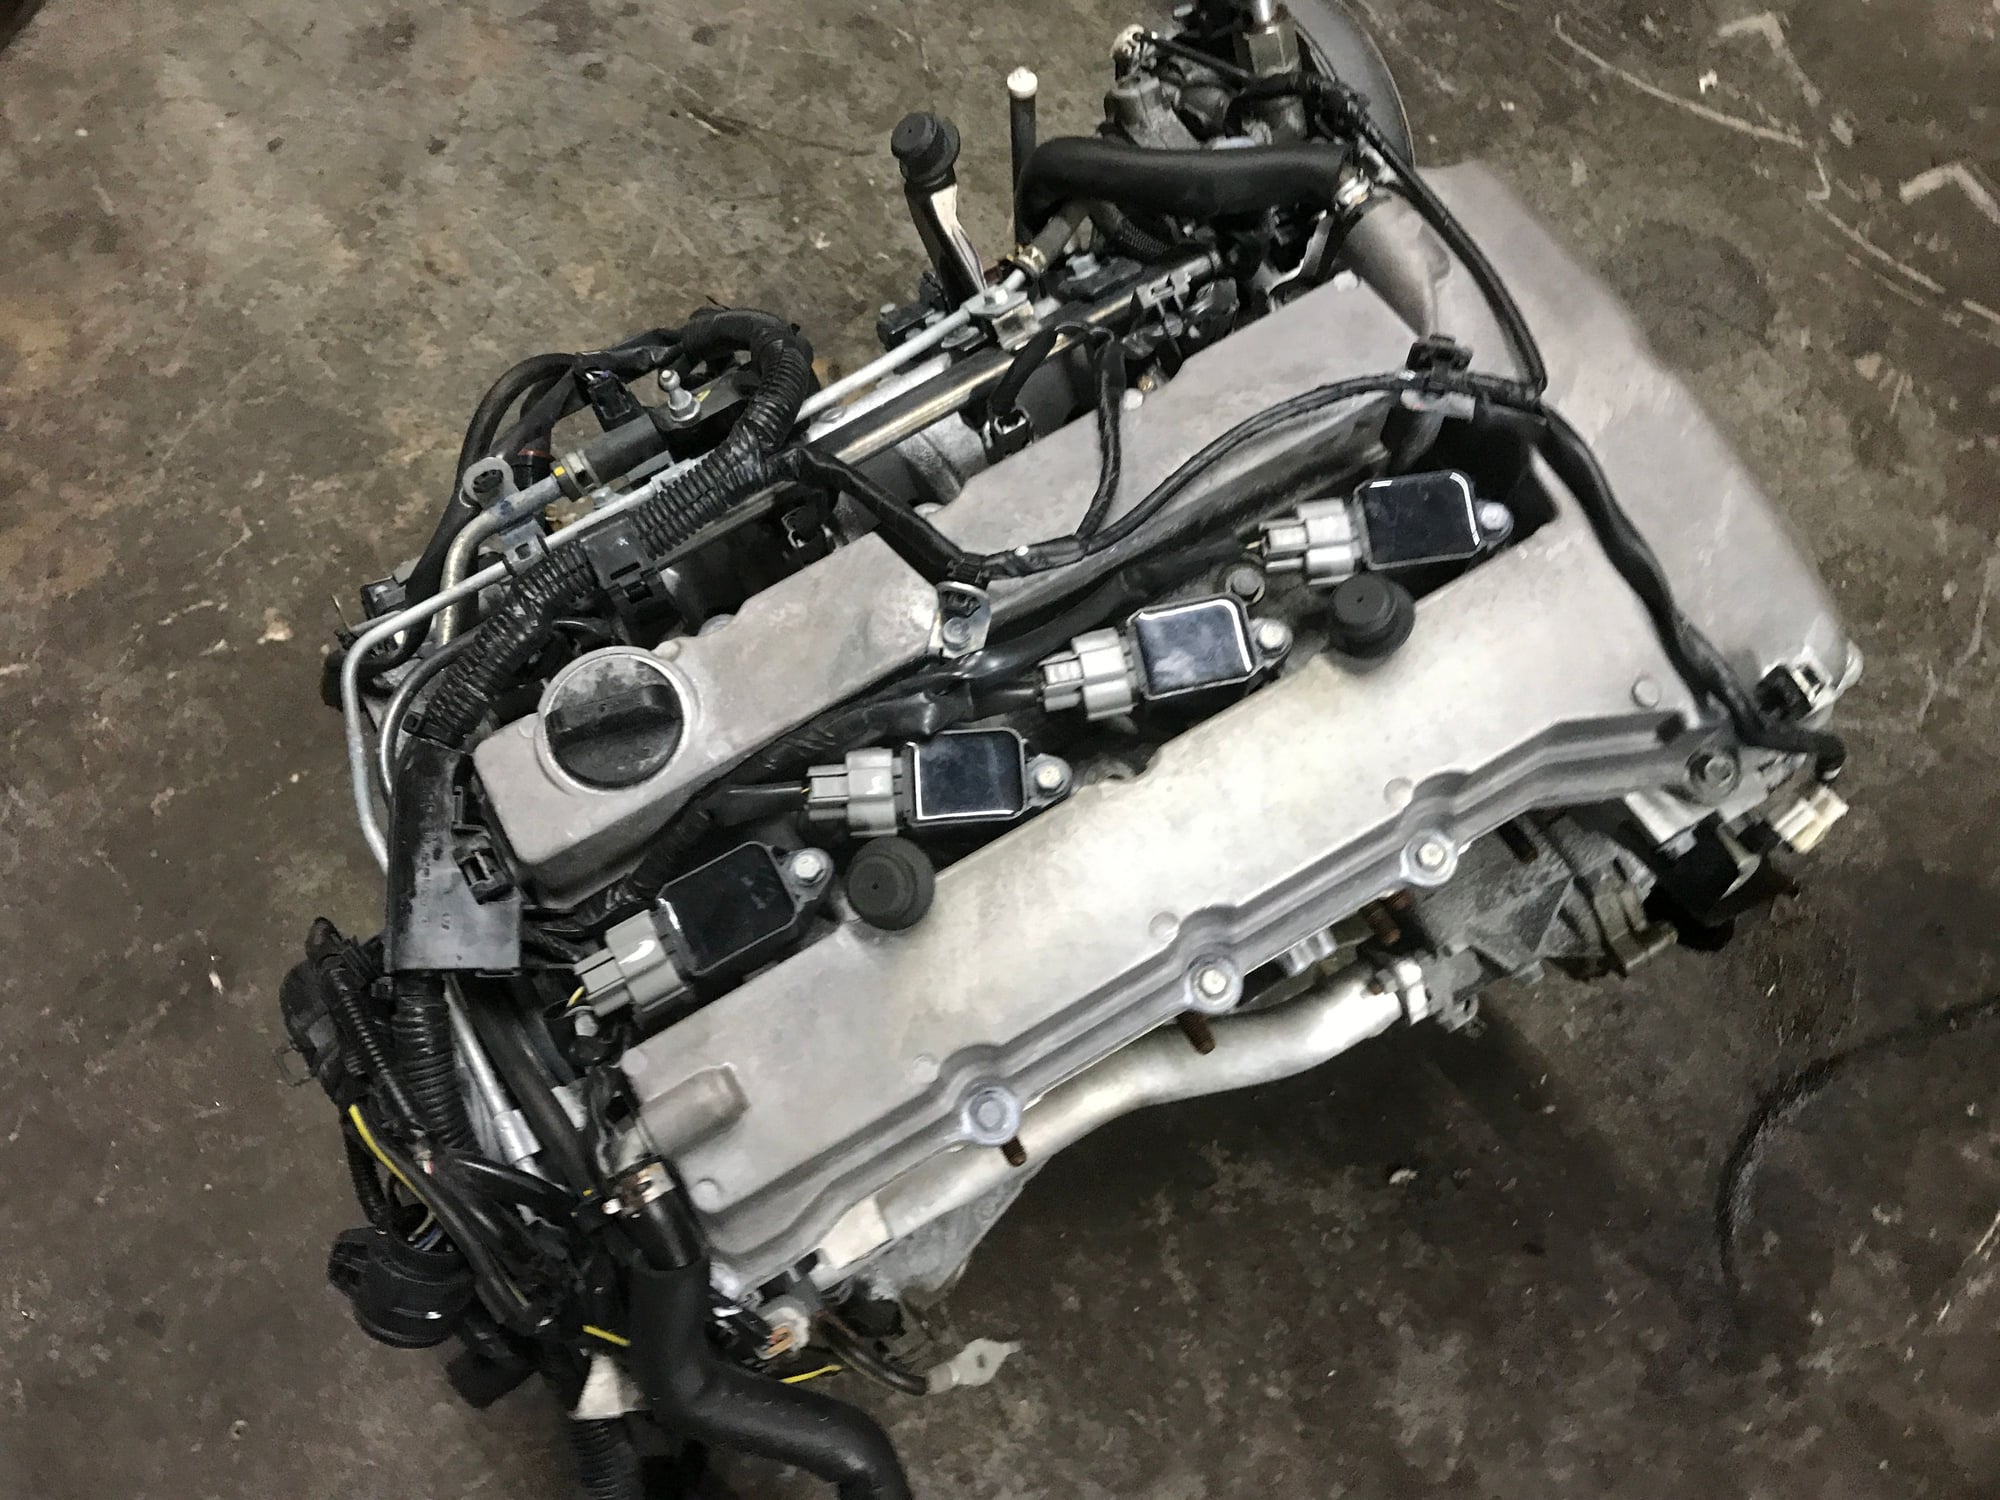 Engine - Complete - 4b11t evo x complete long block w/ harness and accessories - Used - Hollywood, FL 33024, United States